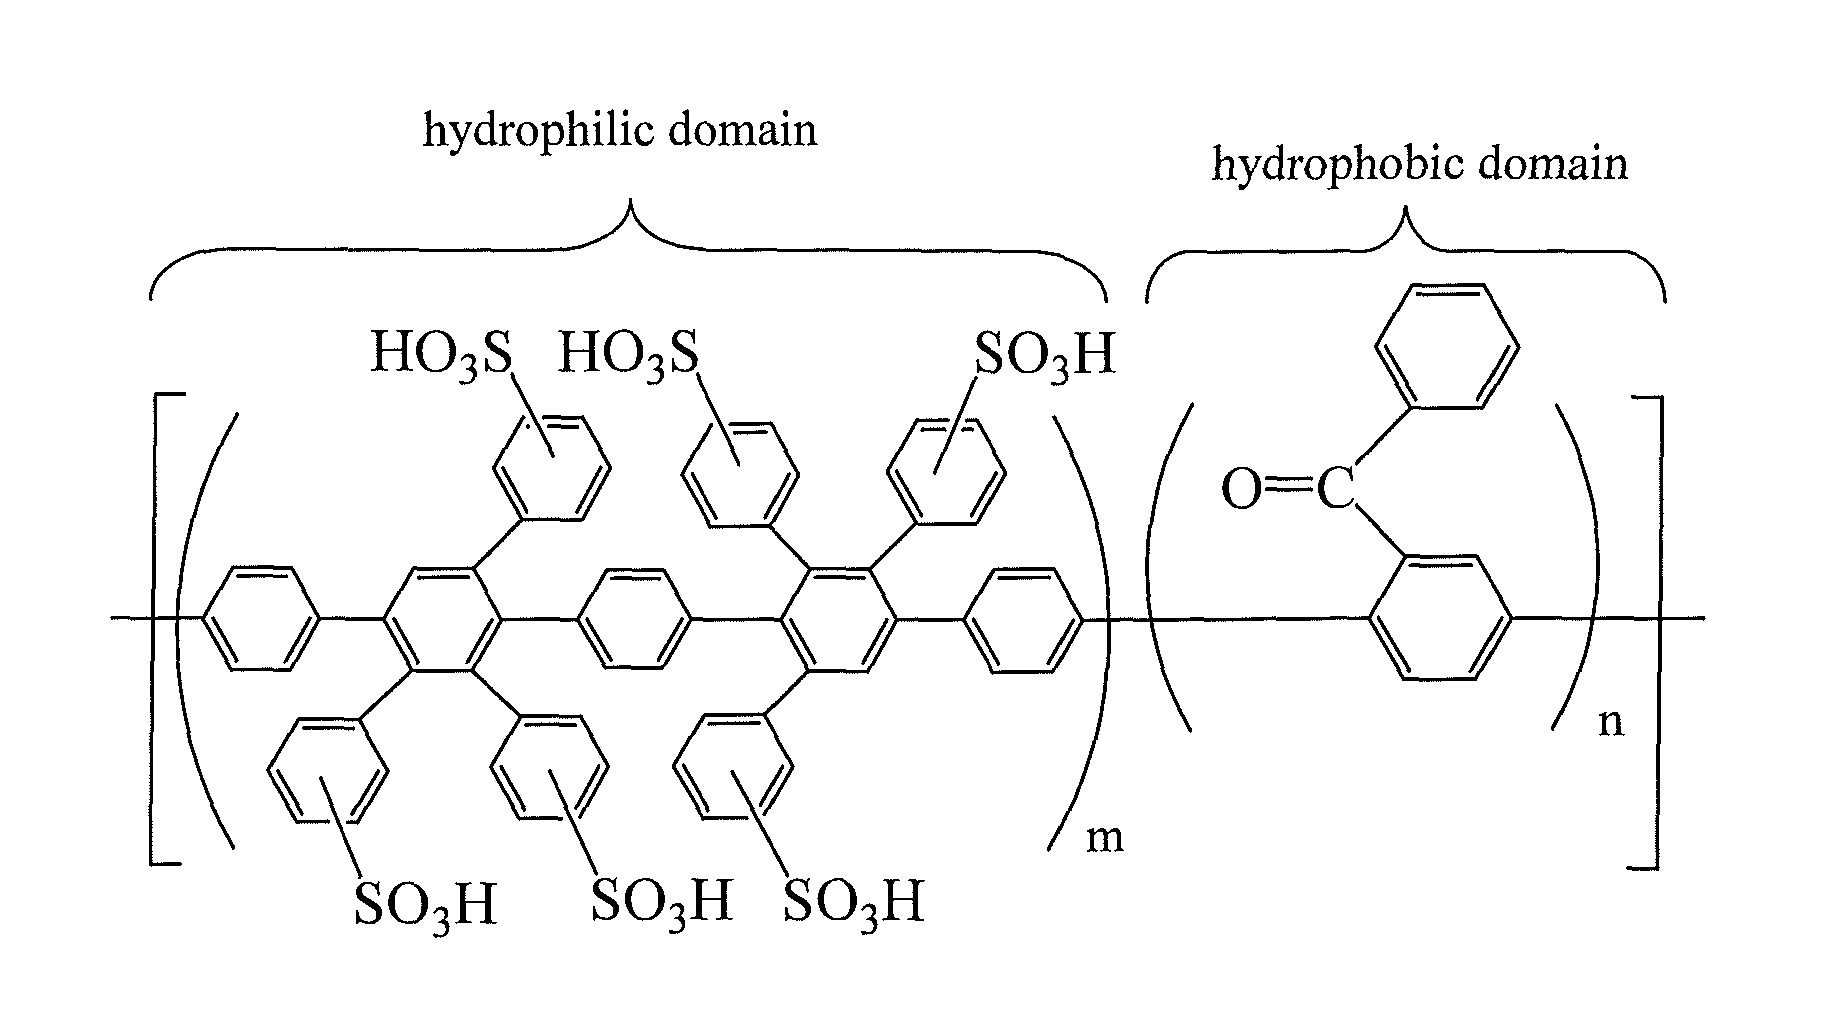 Sulfonated poly(phenylene) copolymer electrolyte for fuel cells